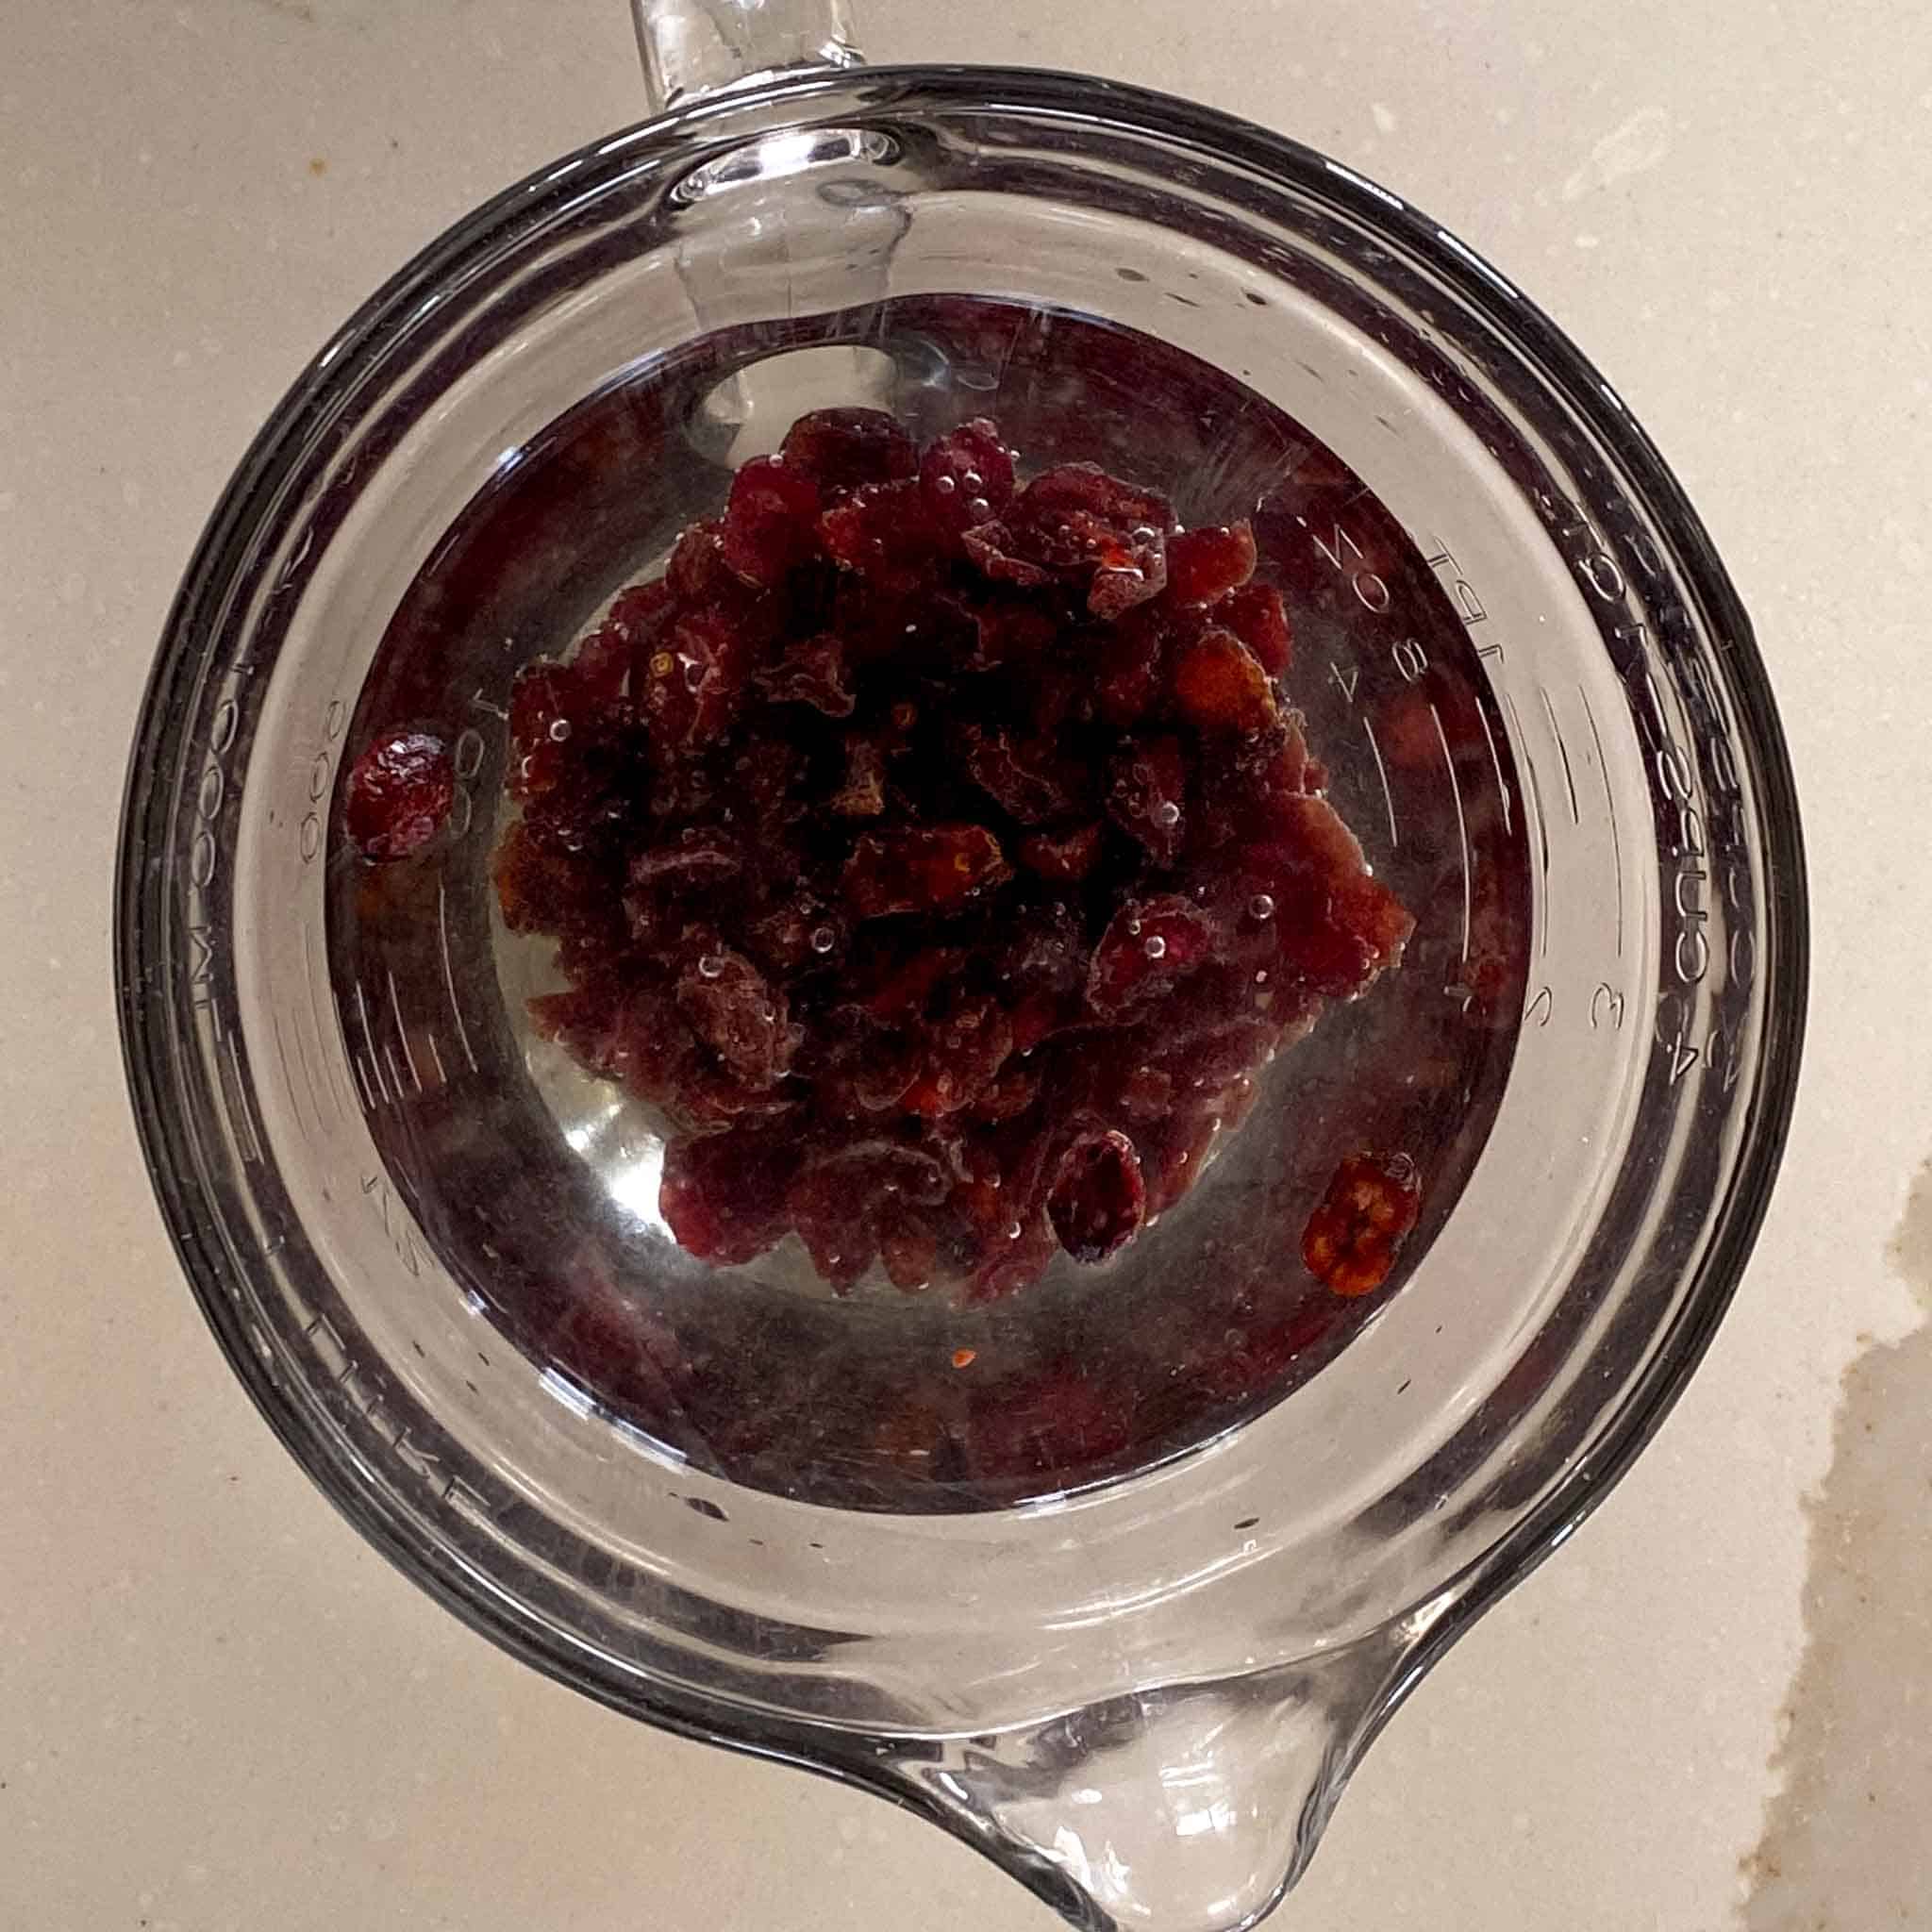 Cranberries rehydrating in a large cup of warm water.